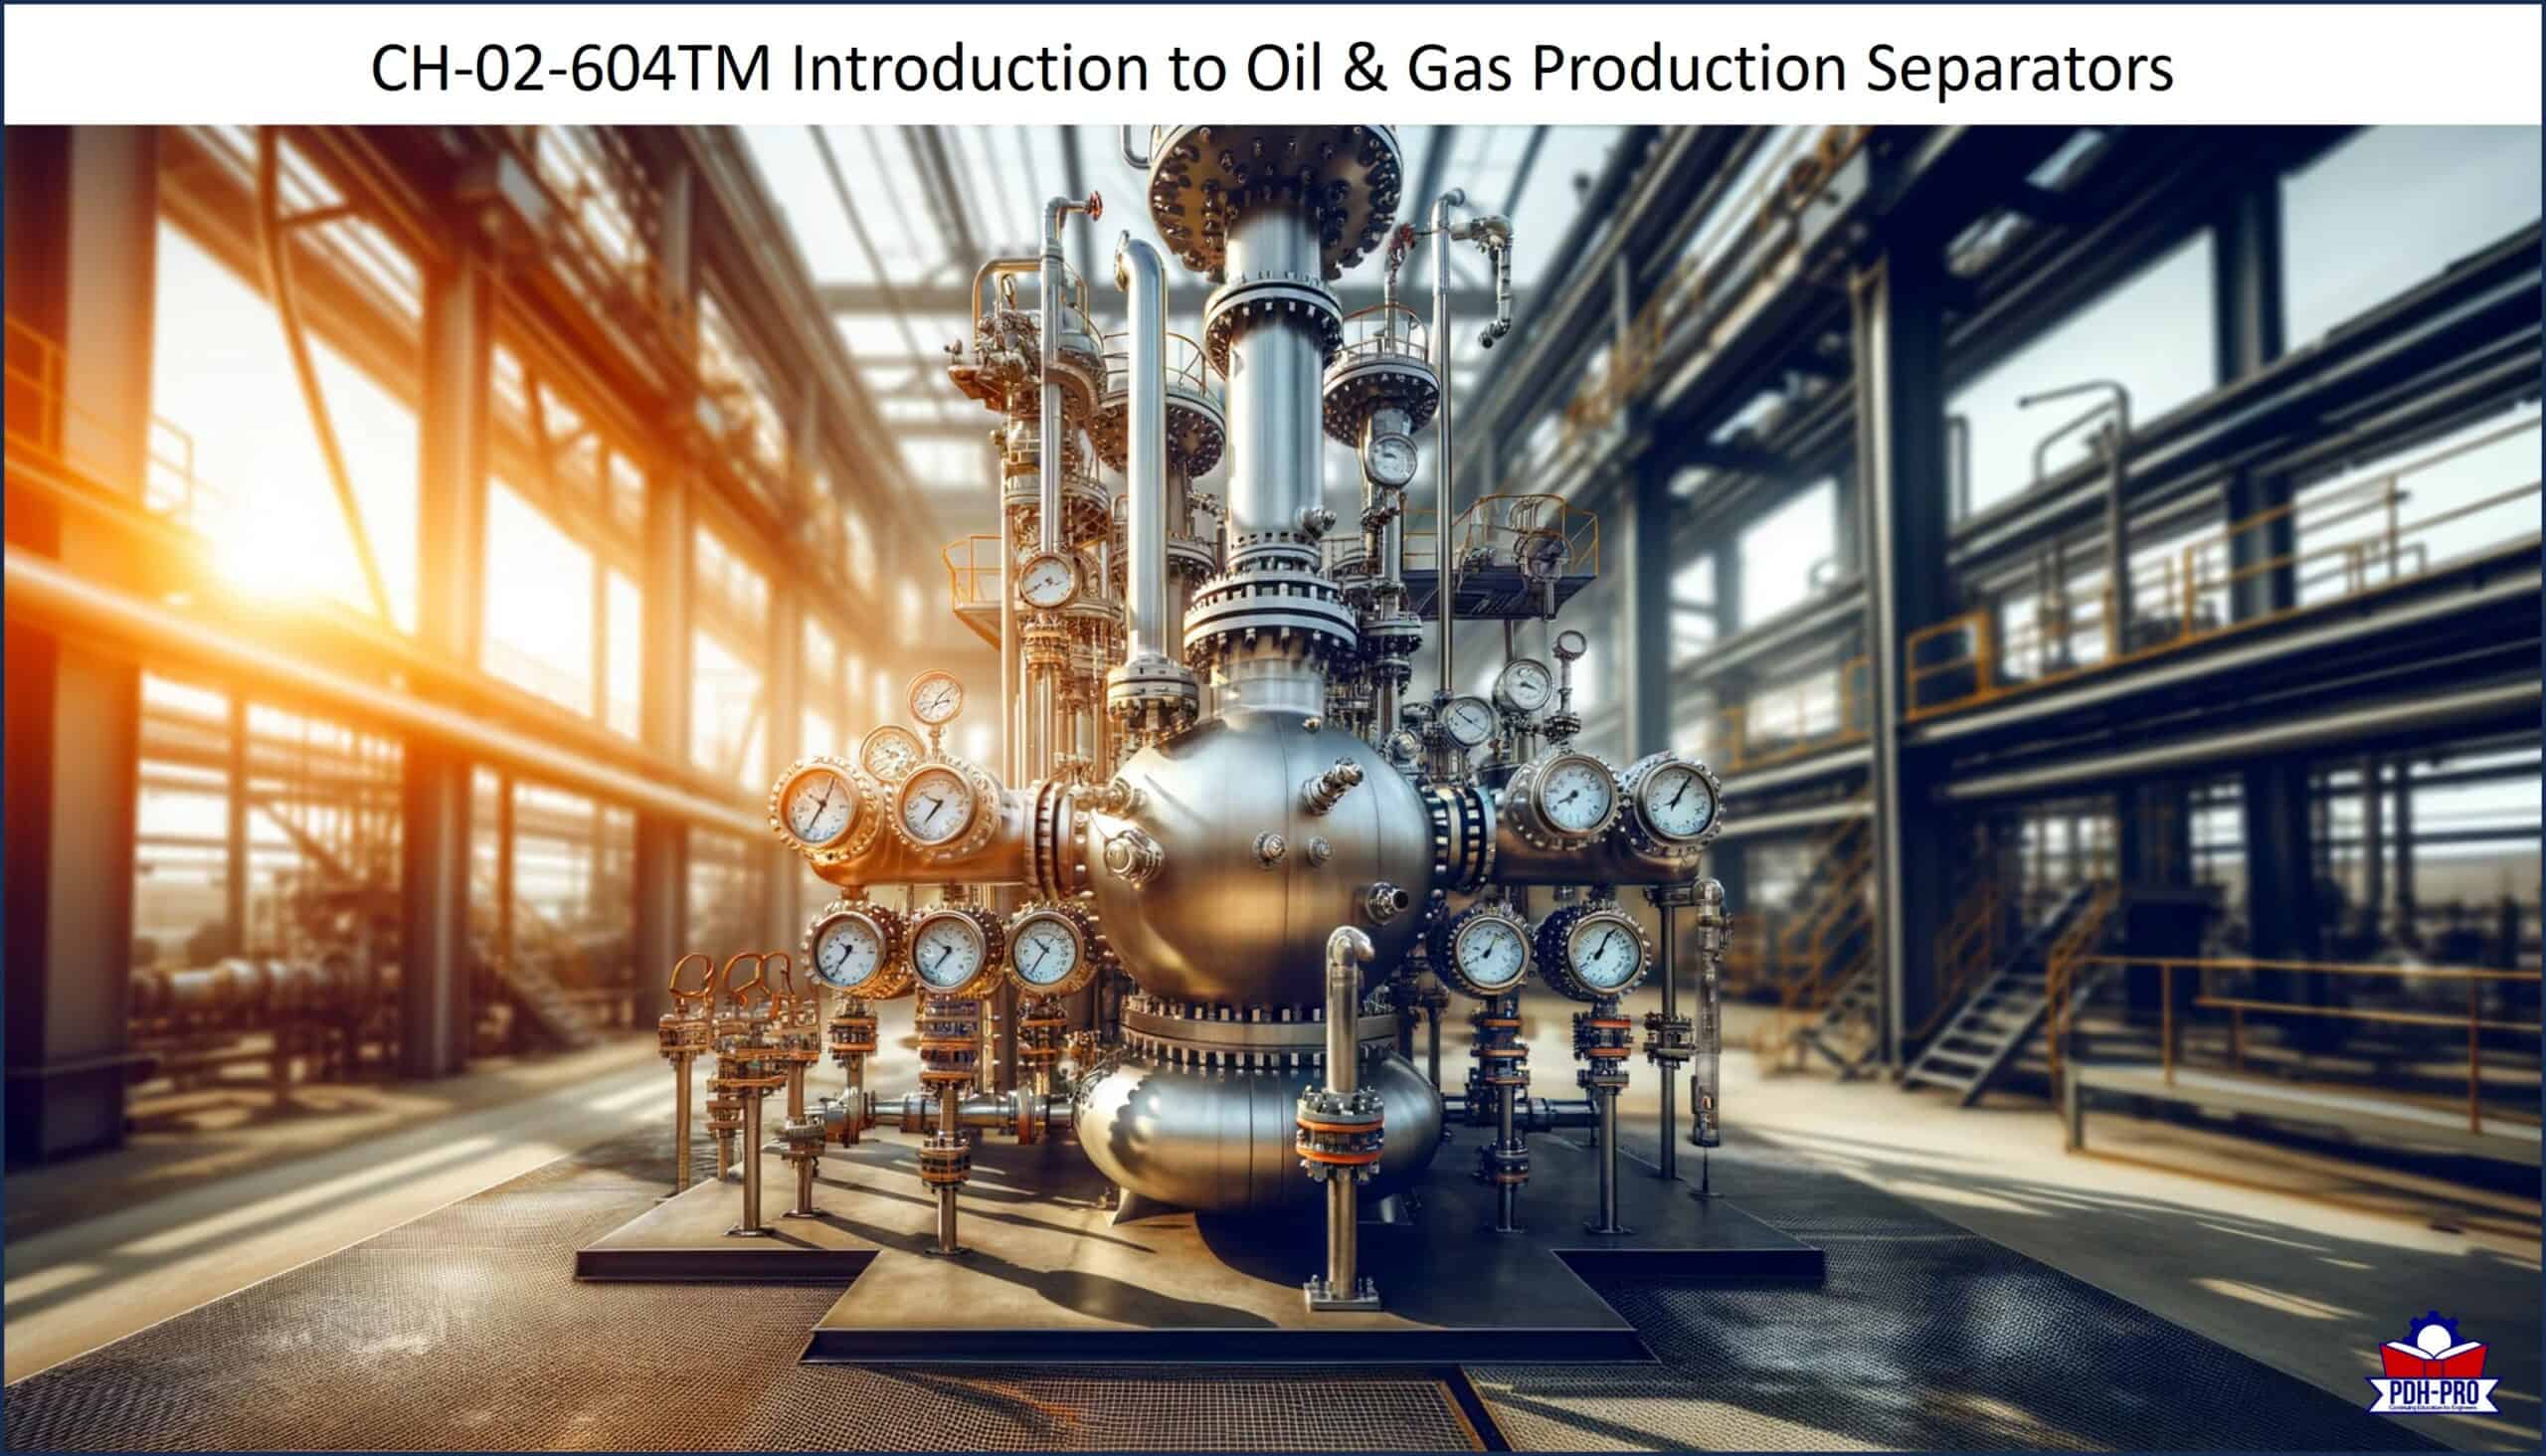 Recorded Webinar – Introduction to Oil & Gas Production Separators